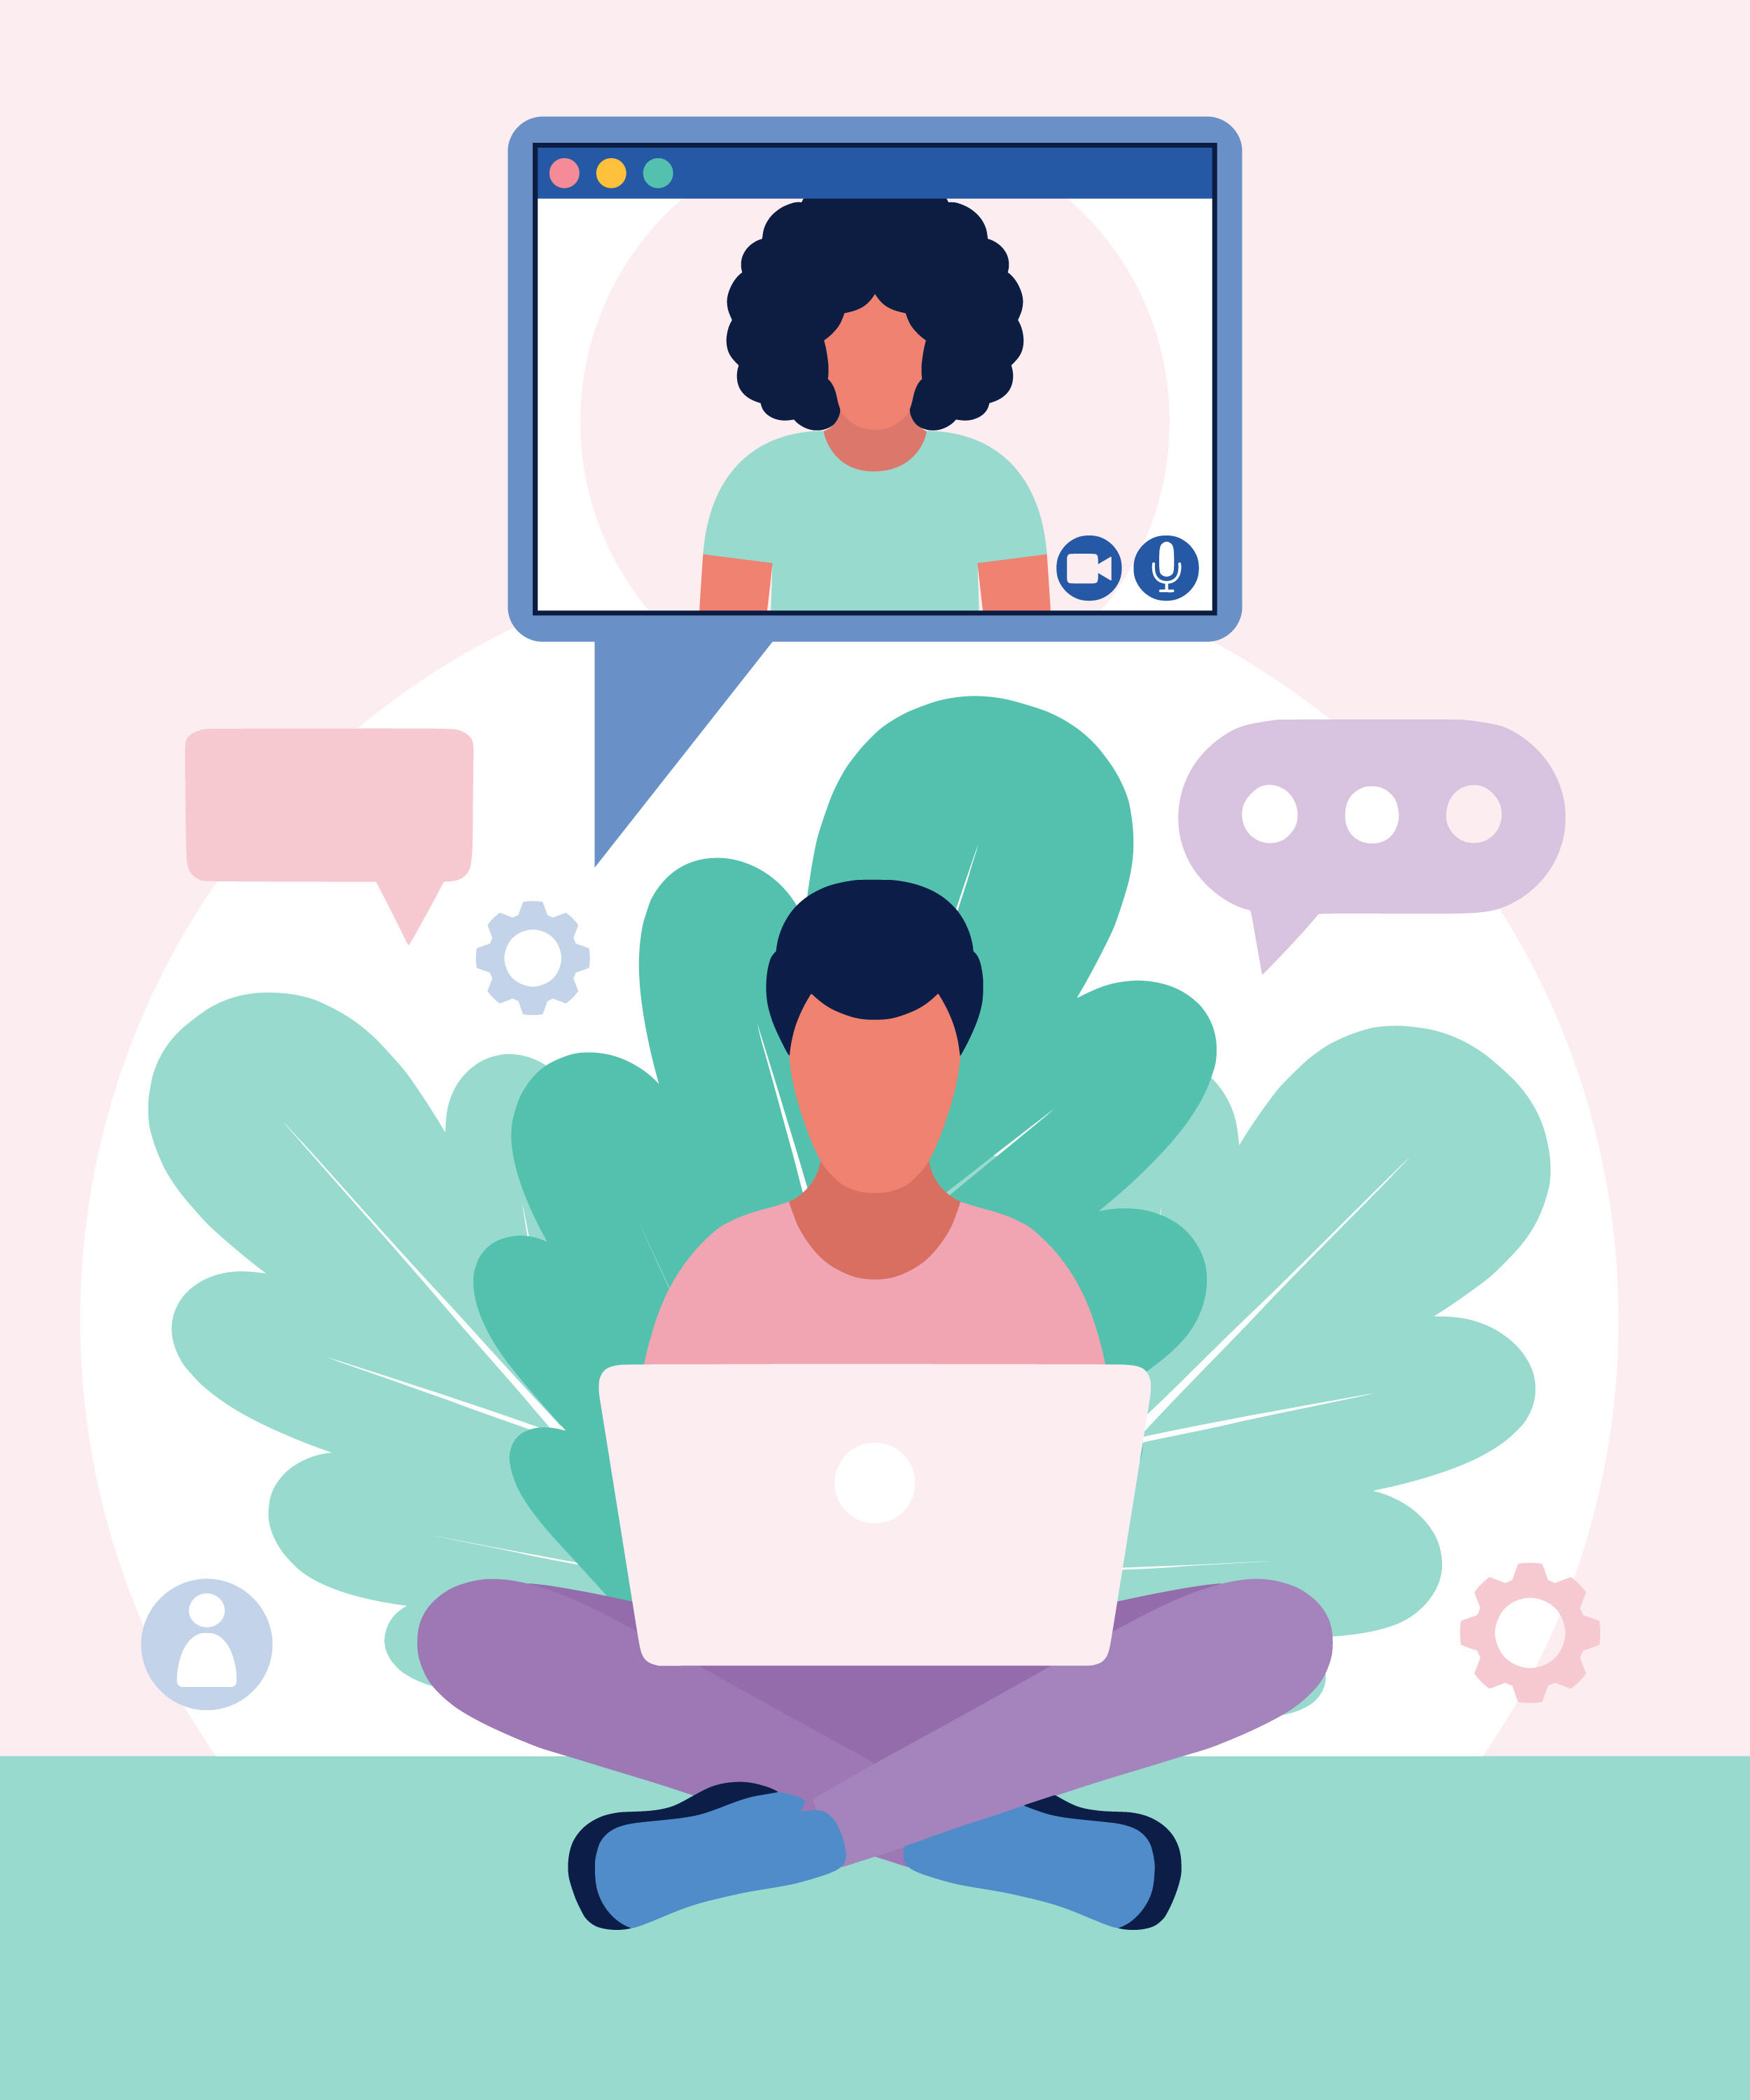 illustration of a person seated on the floor in front of laptop videochatting with a woman pictured on a computer screen above her